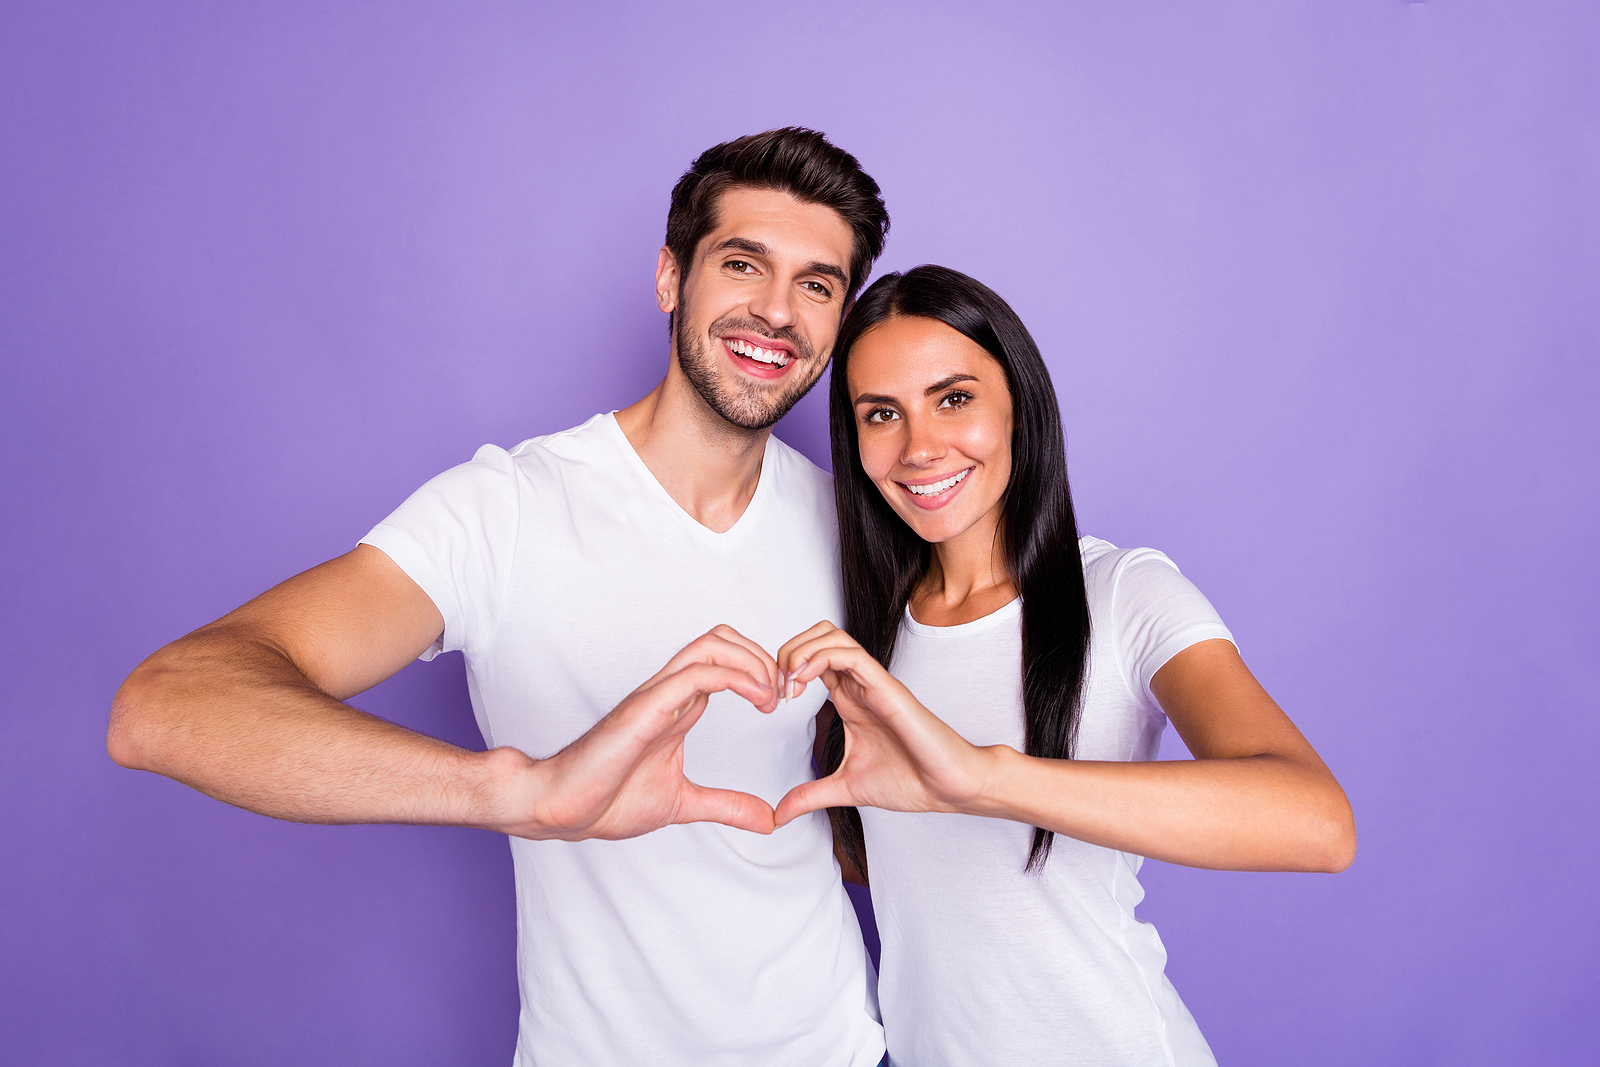 Portrait of a man and woman wearing plain t shirts and making a heart shape with one hand each, smiling.